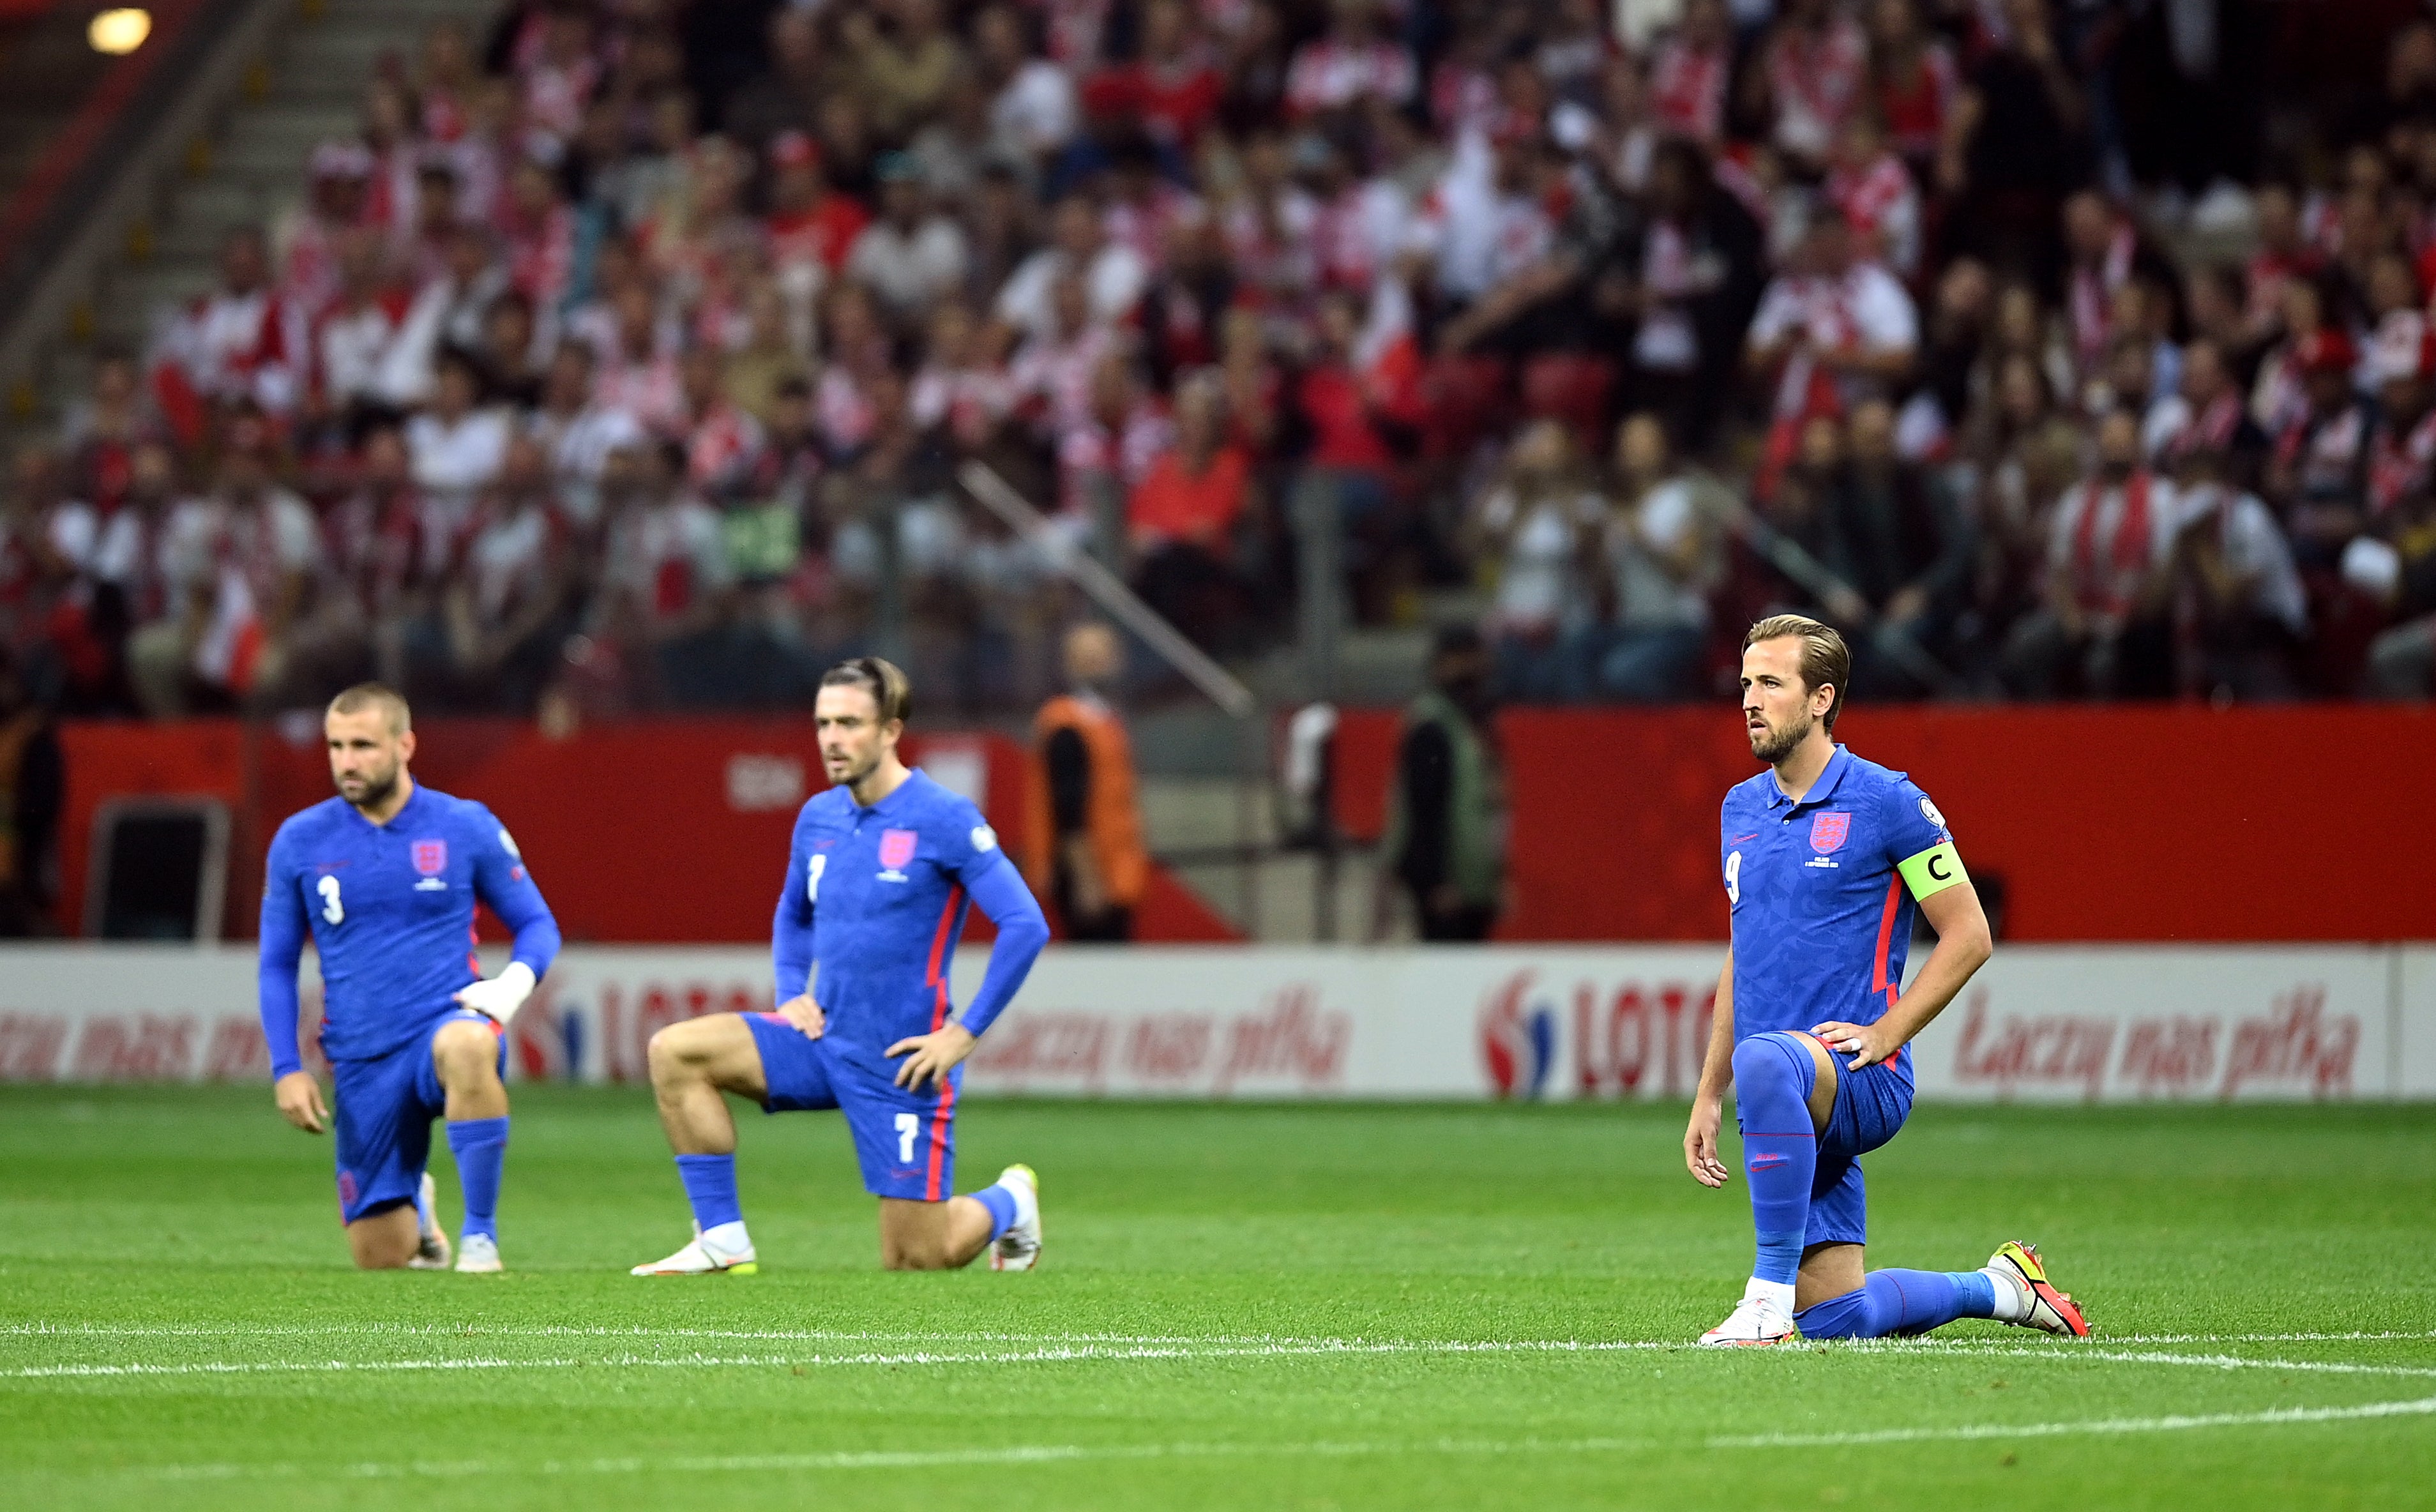 England have been taking the knee before matches in an anti-discrimination gesture (Rafal Oleksiewicz/PA)